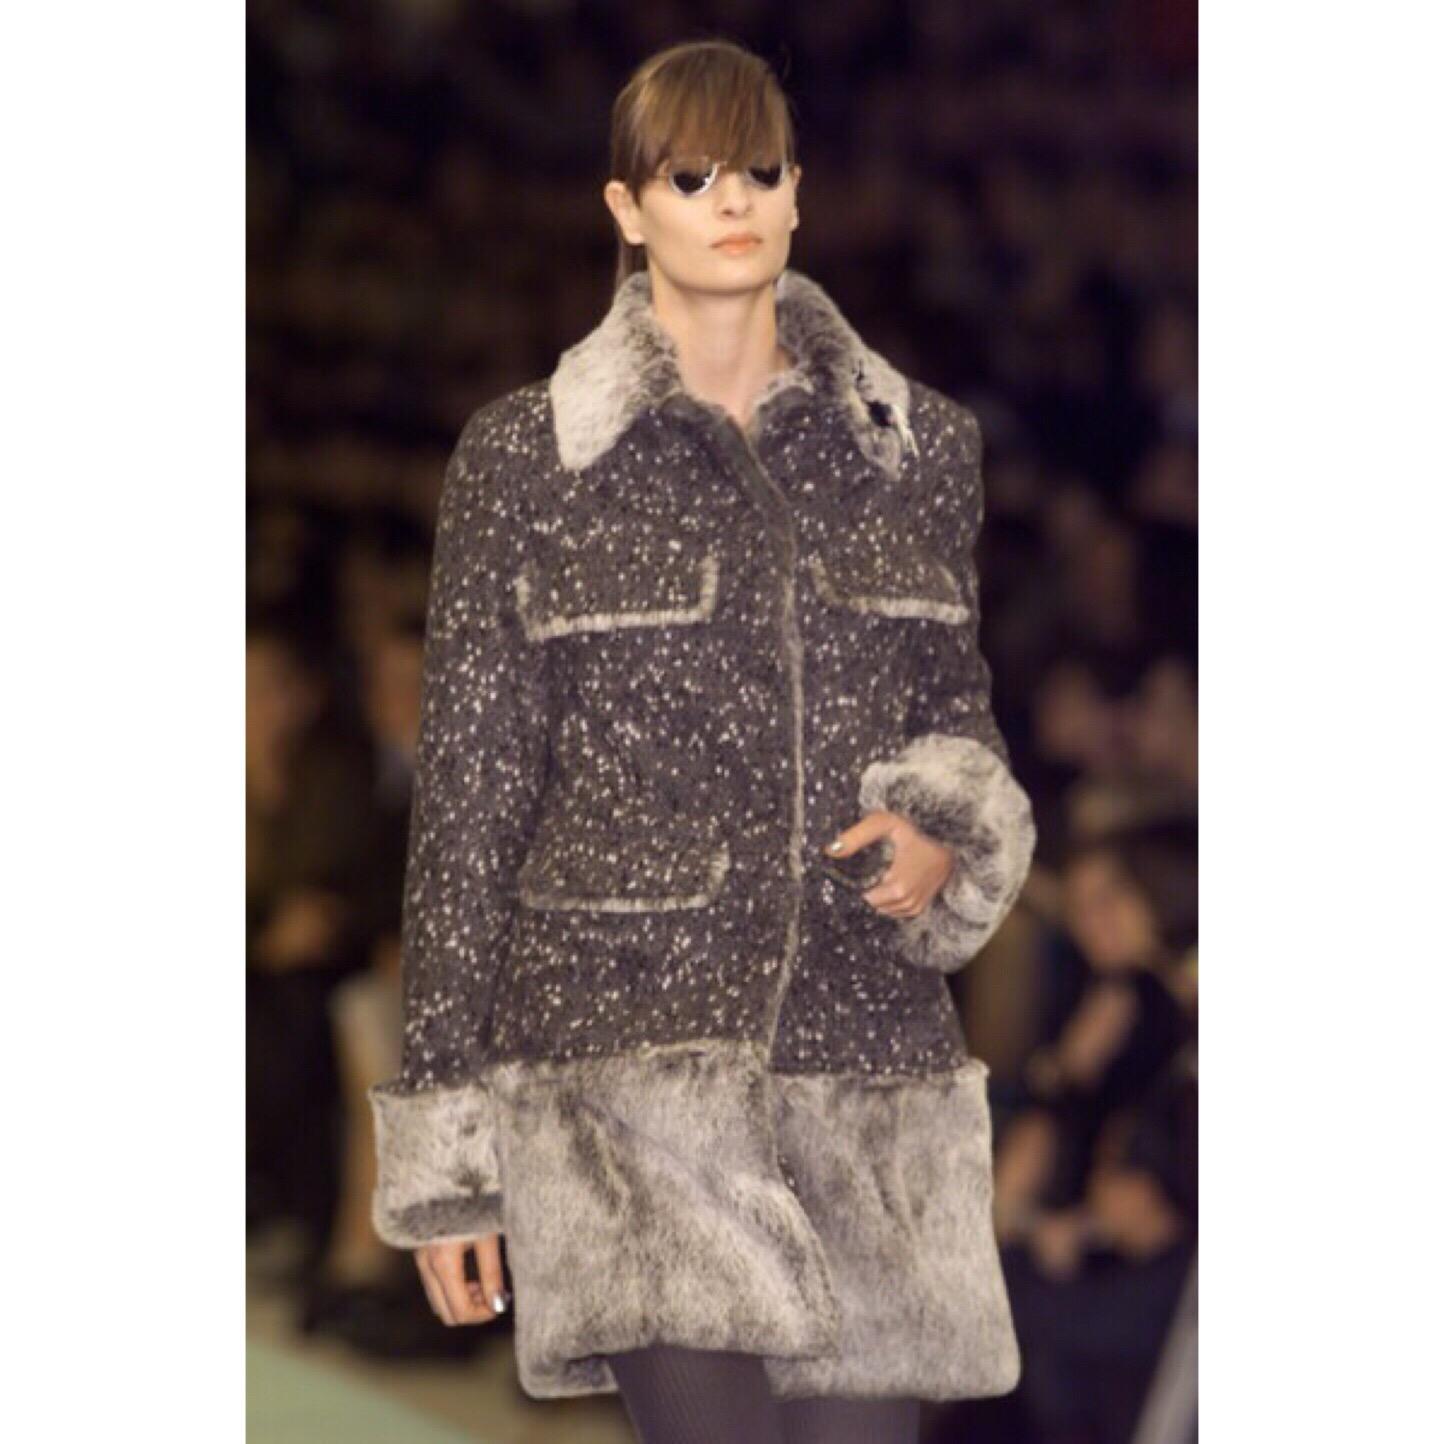 The Chanel Fall 2001 collection had a quirky yet fantastical aesthetic blending a high-end fur coats with futuristic interpretations of winter wear and everything in between. A variation between the chunky coats and fitted sweaters struck an uncanny